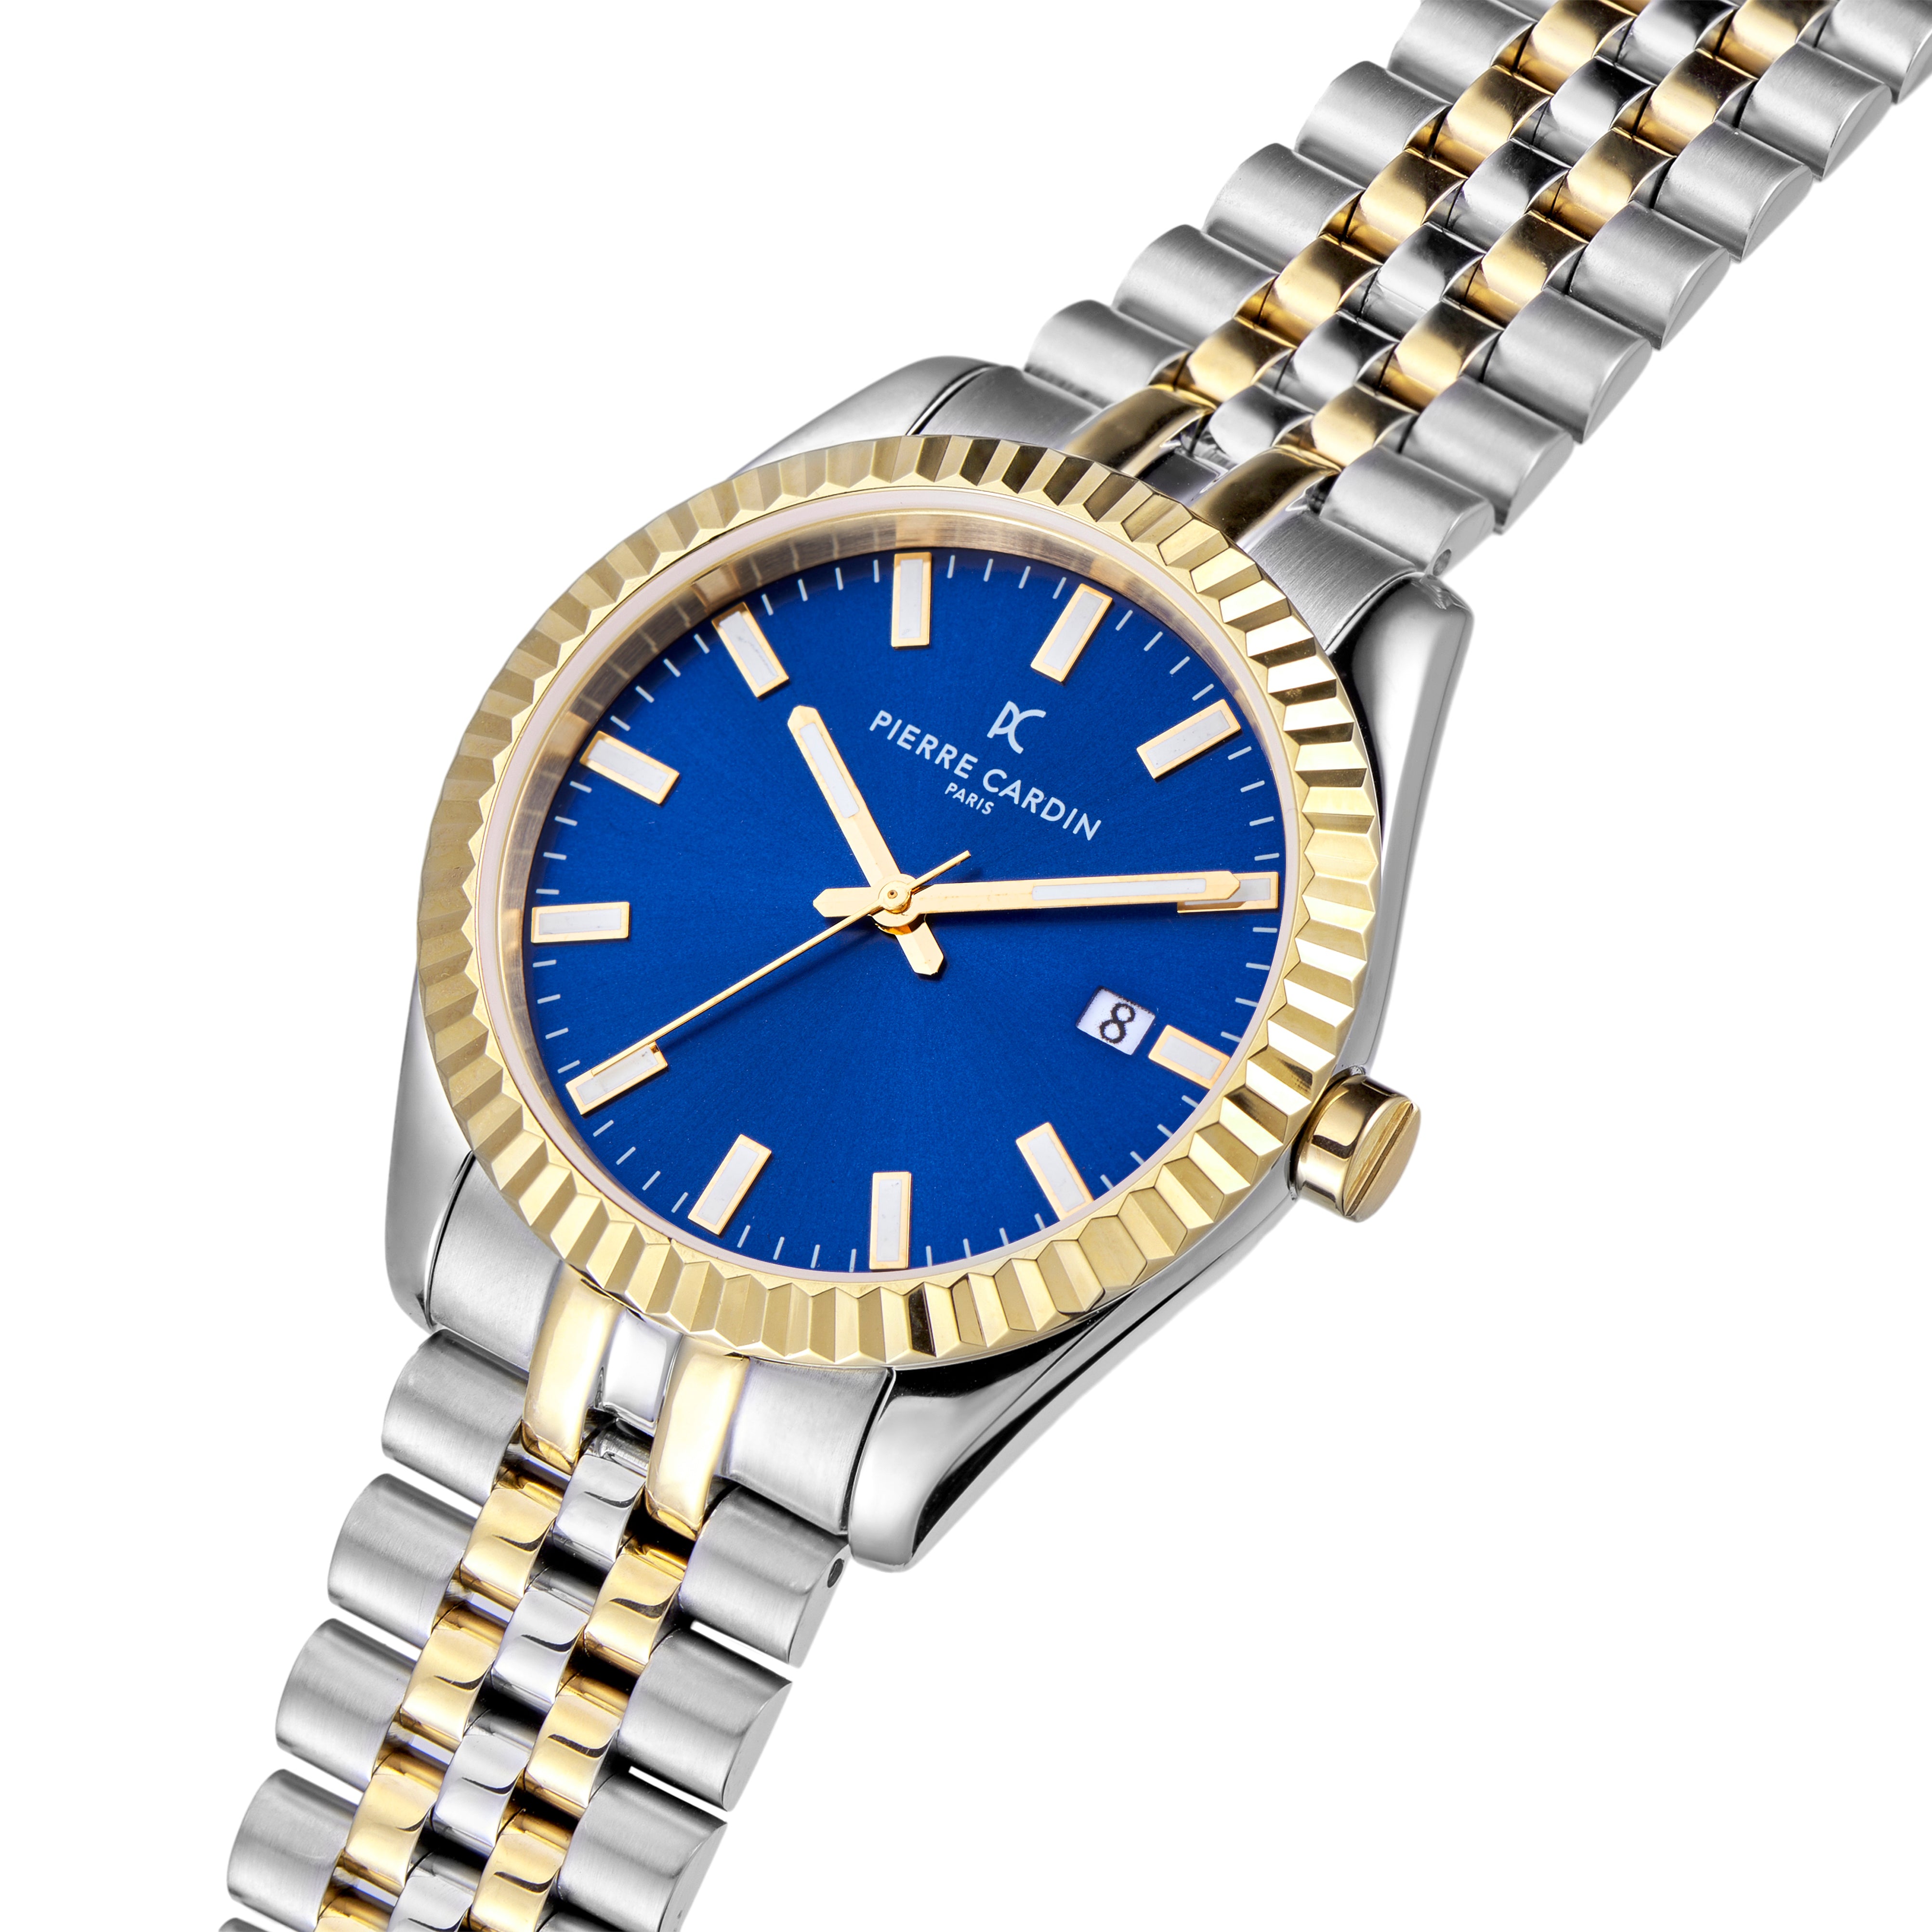 Opera Stainless Steel Date Watch with Fluted Bezel and Blue Dial